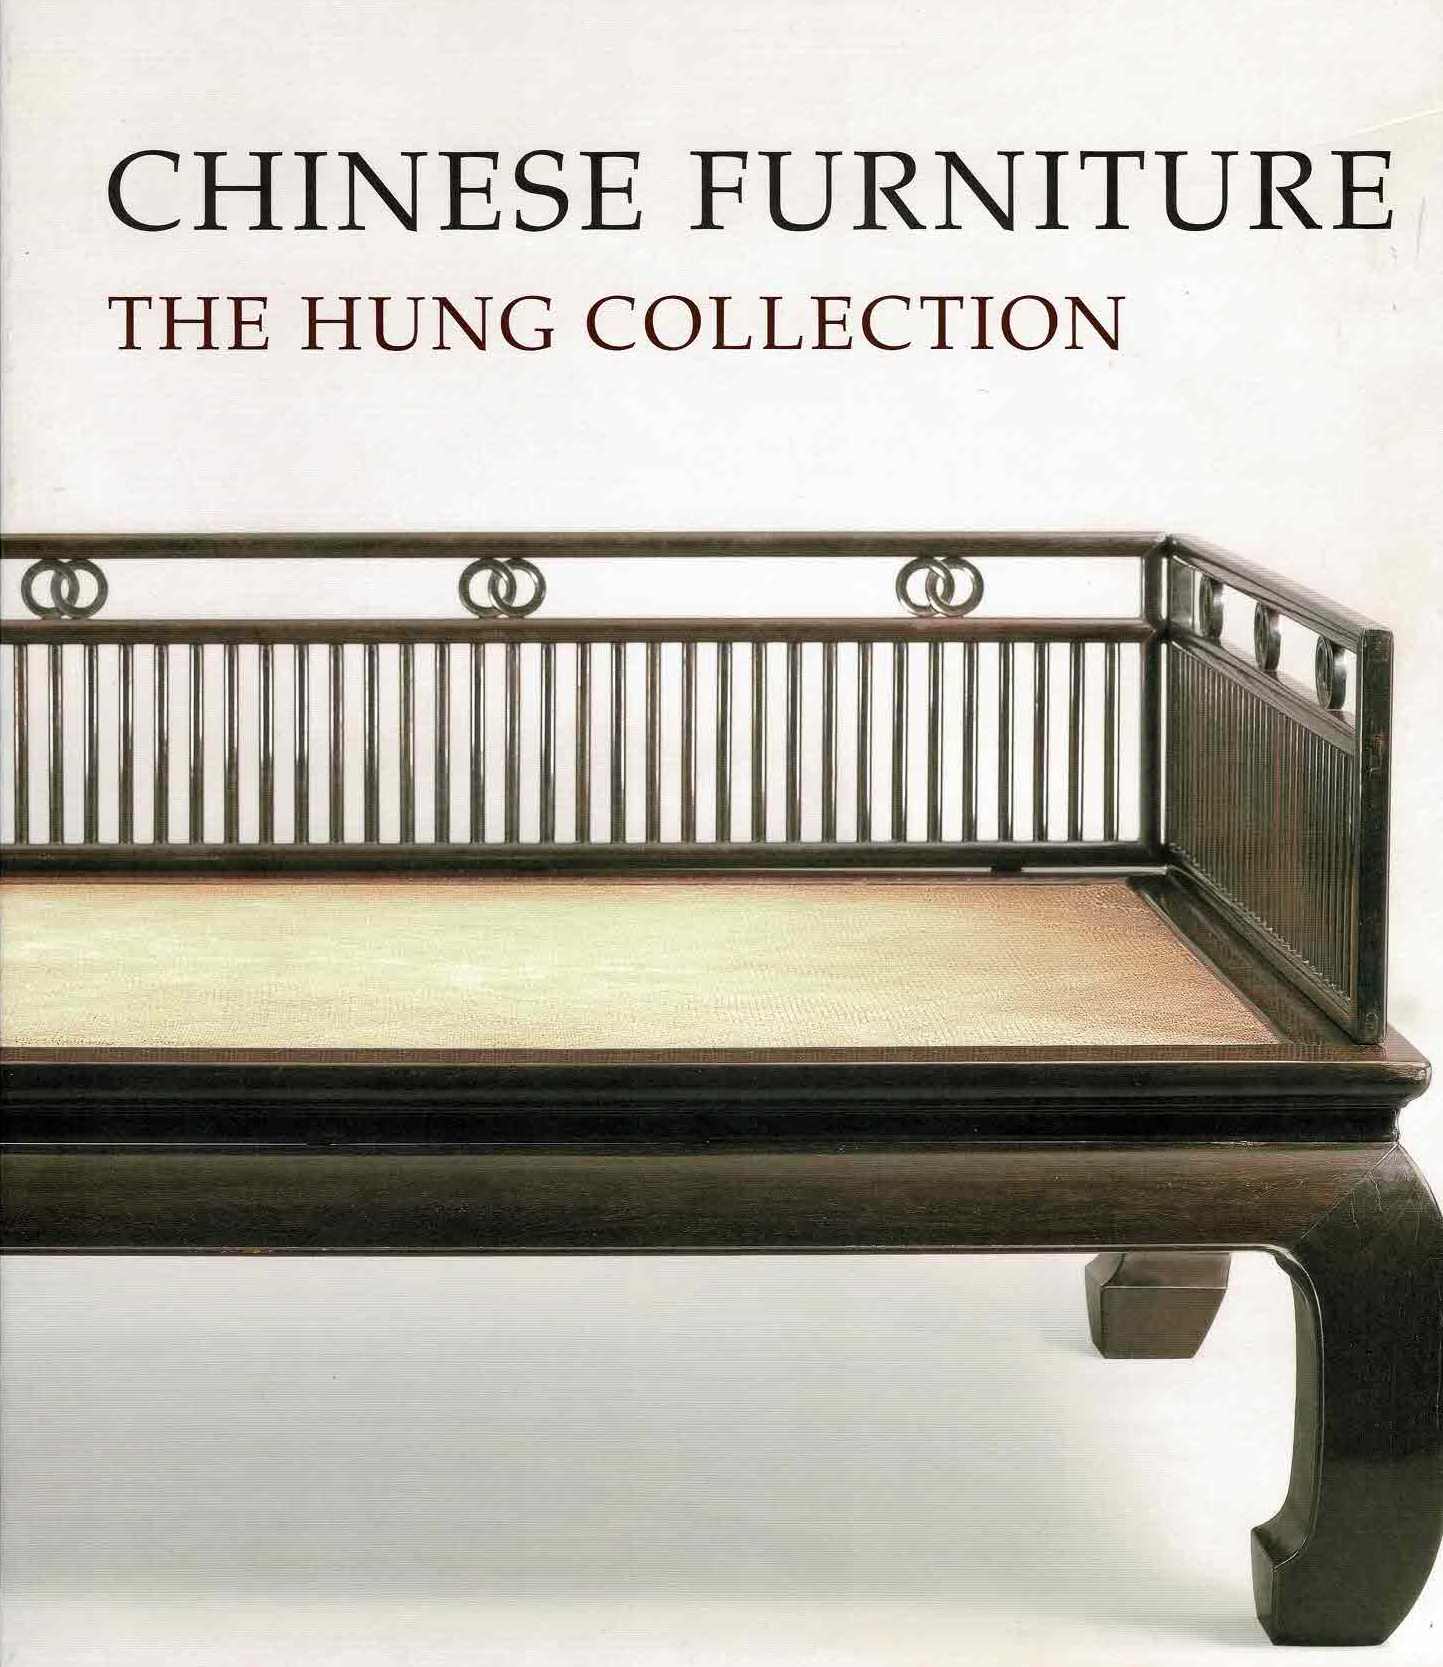 Robert Hatfield Ellsworth - Chinese Furniture - One Hundred Examples from the Mimi and Raymond Hung Collection